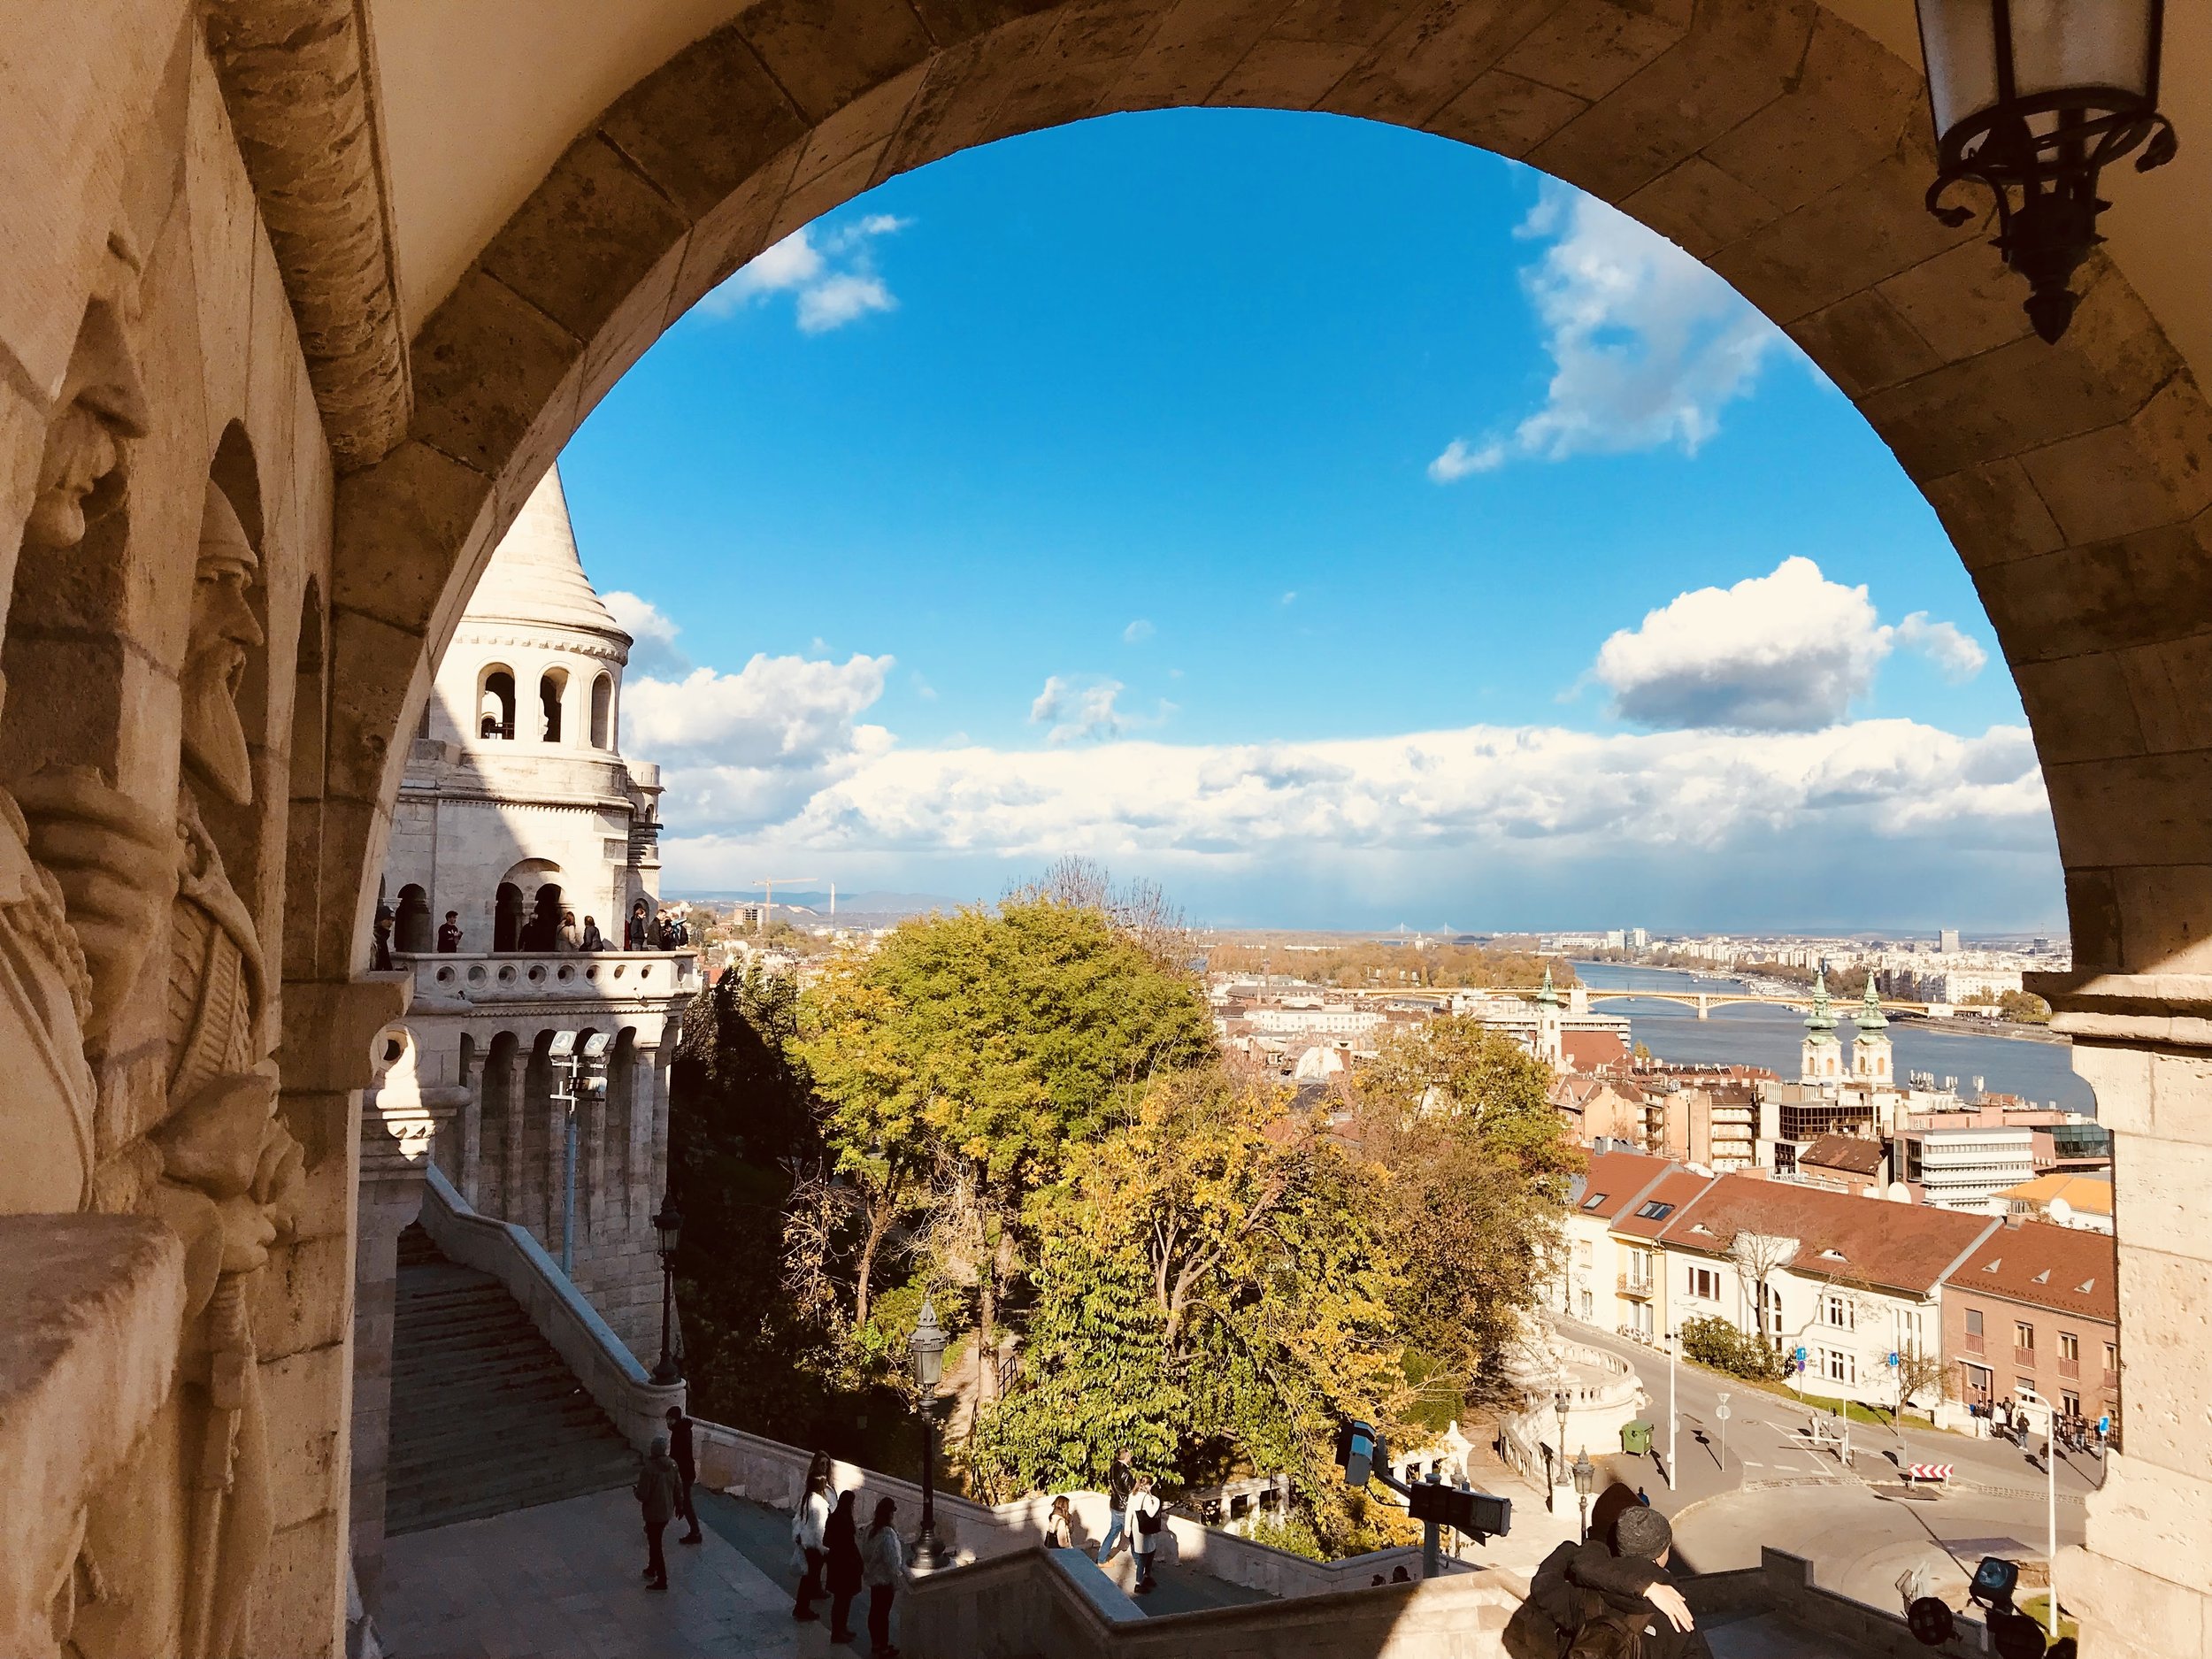 View from Fisherman's Bastion